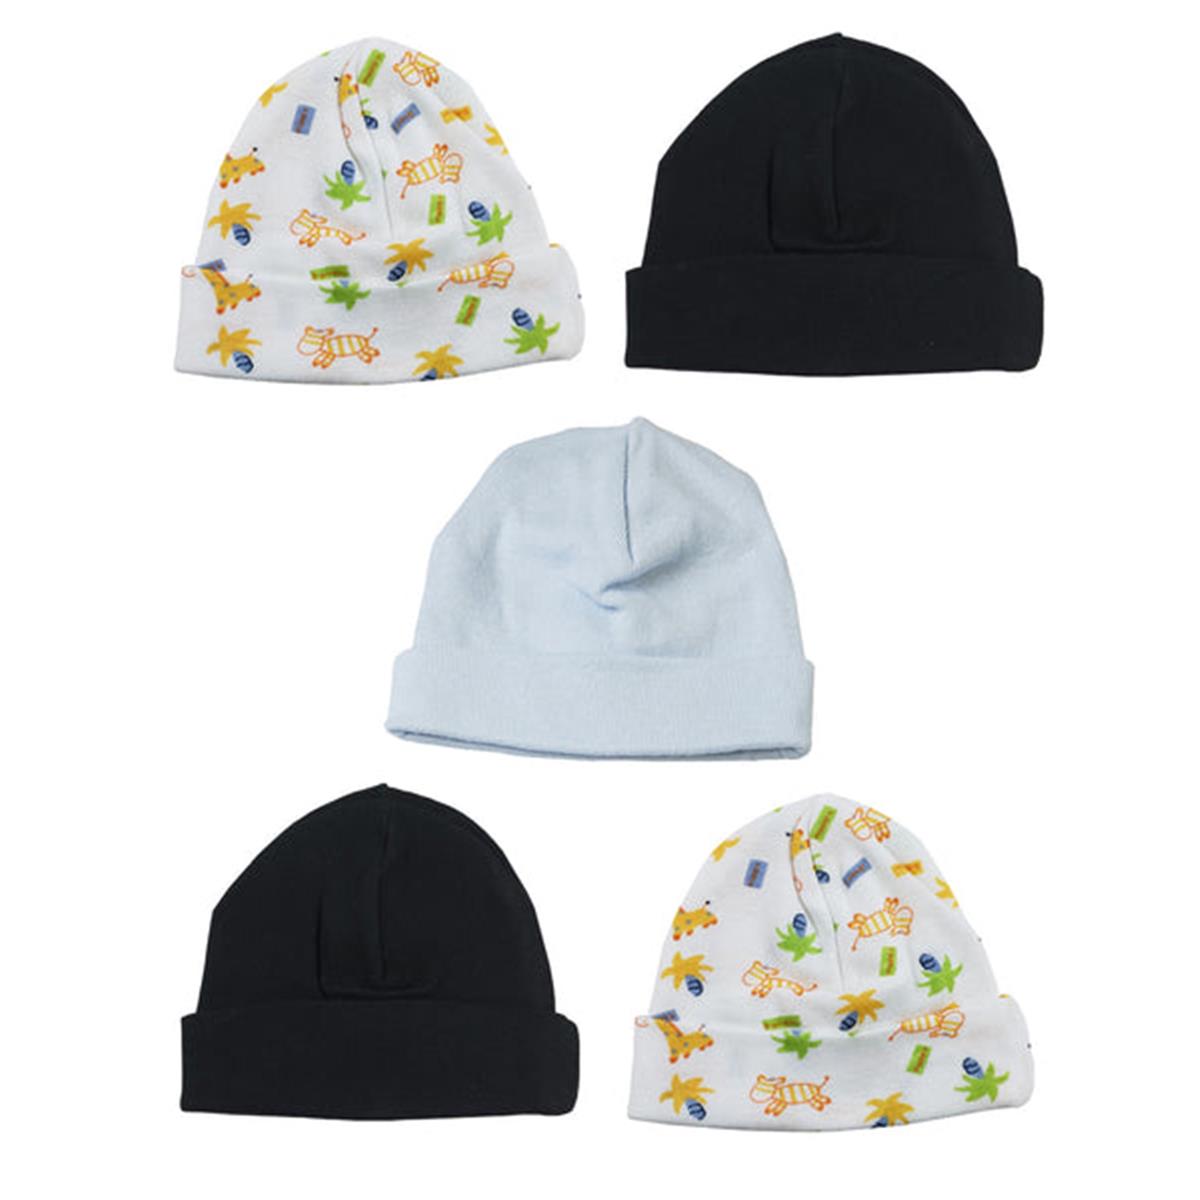 Picture of Bambini LS-0477 Boys Baby Caps - Blue&#44; Black & Print - One Size - 5 per Pack